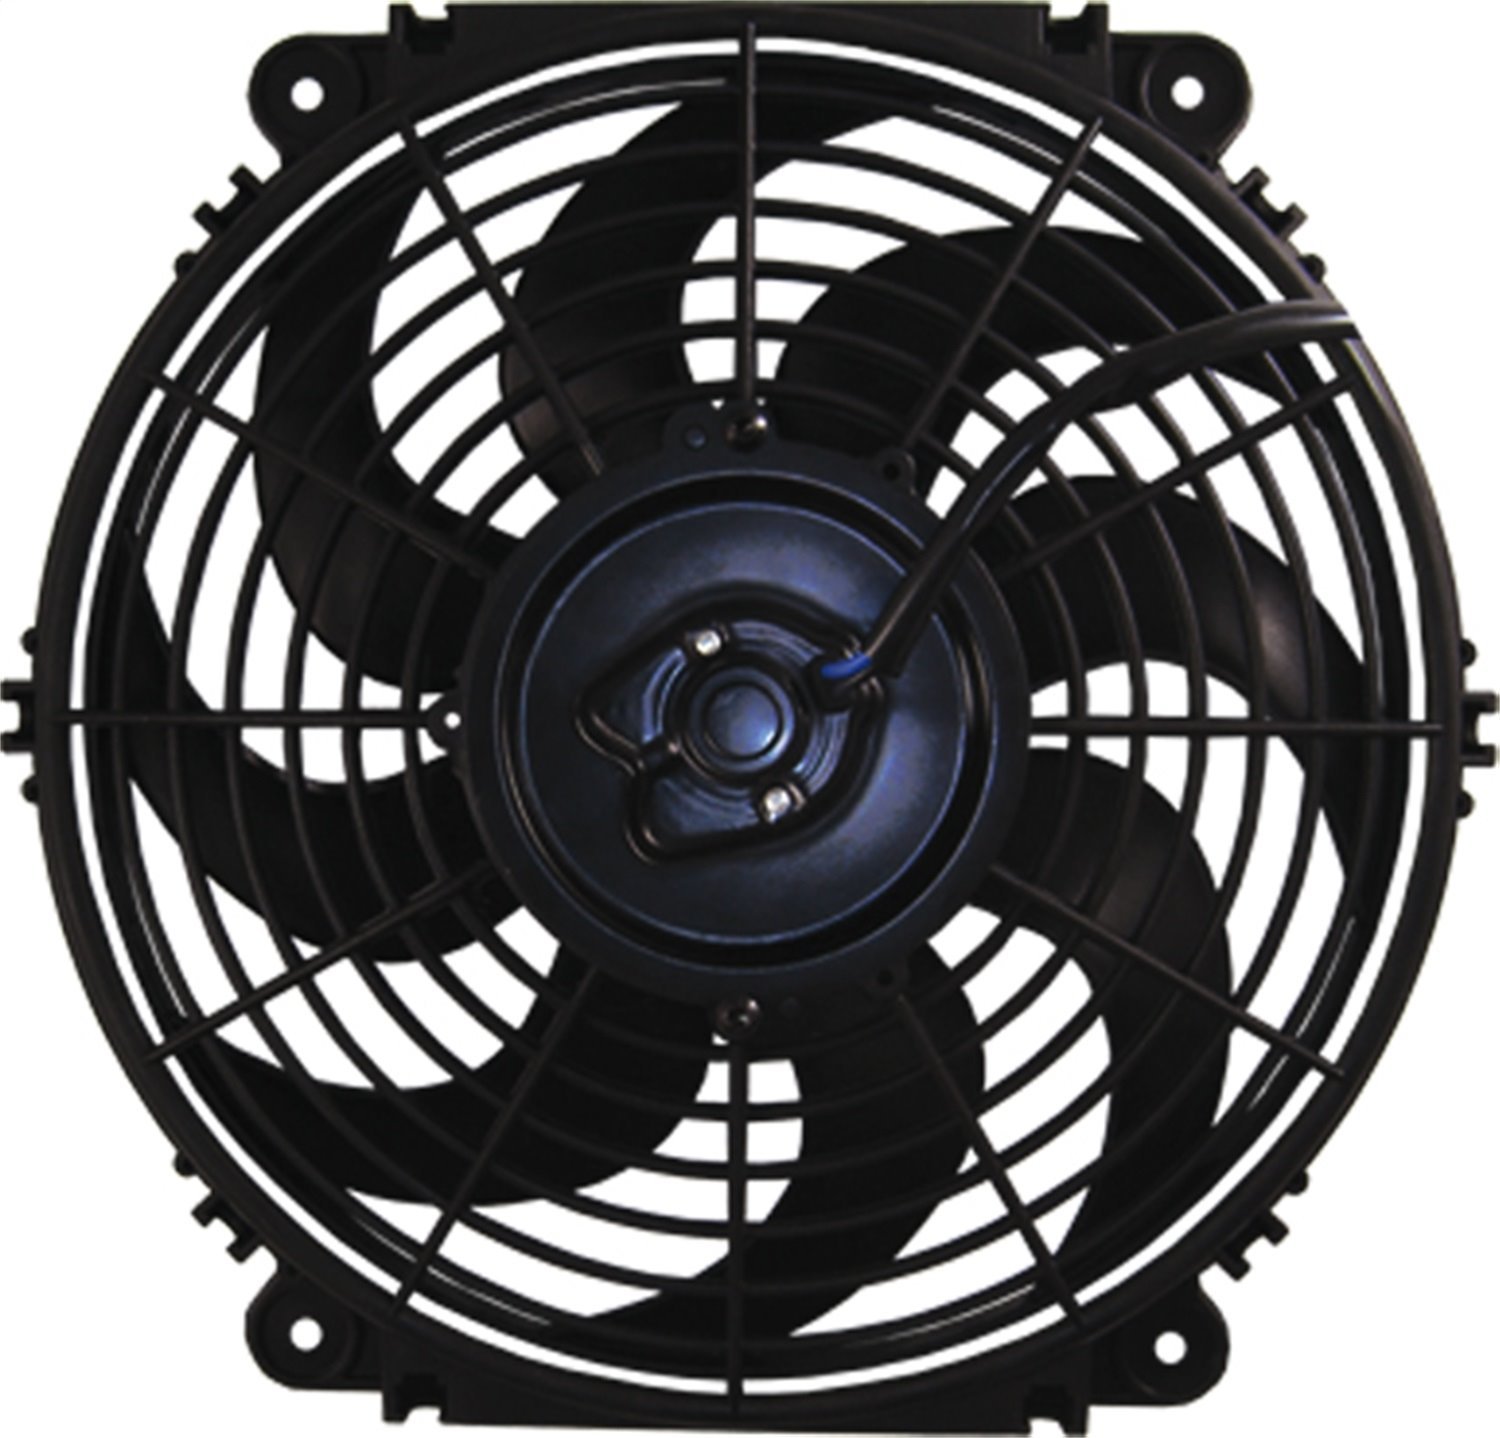 Pacesetter-Series Electric Cooling Fan, Diameter: 11 in., Type: